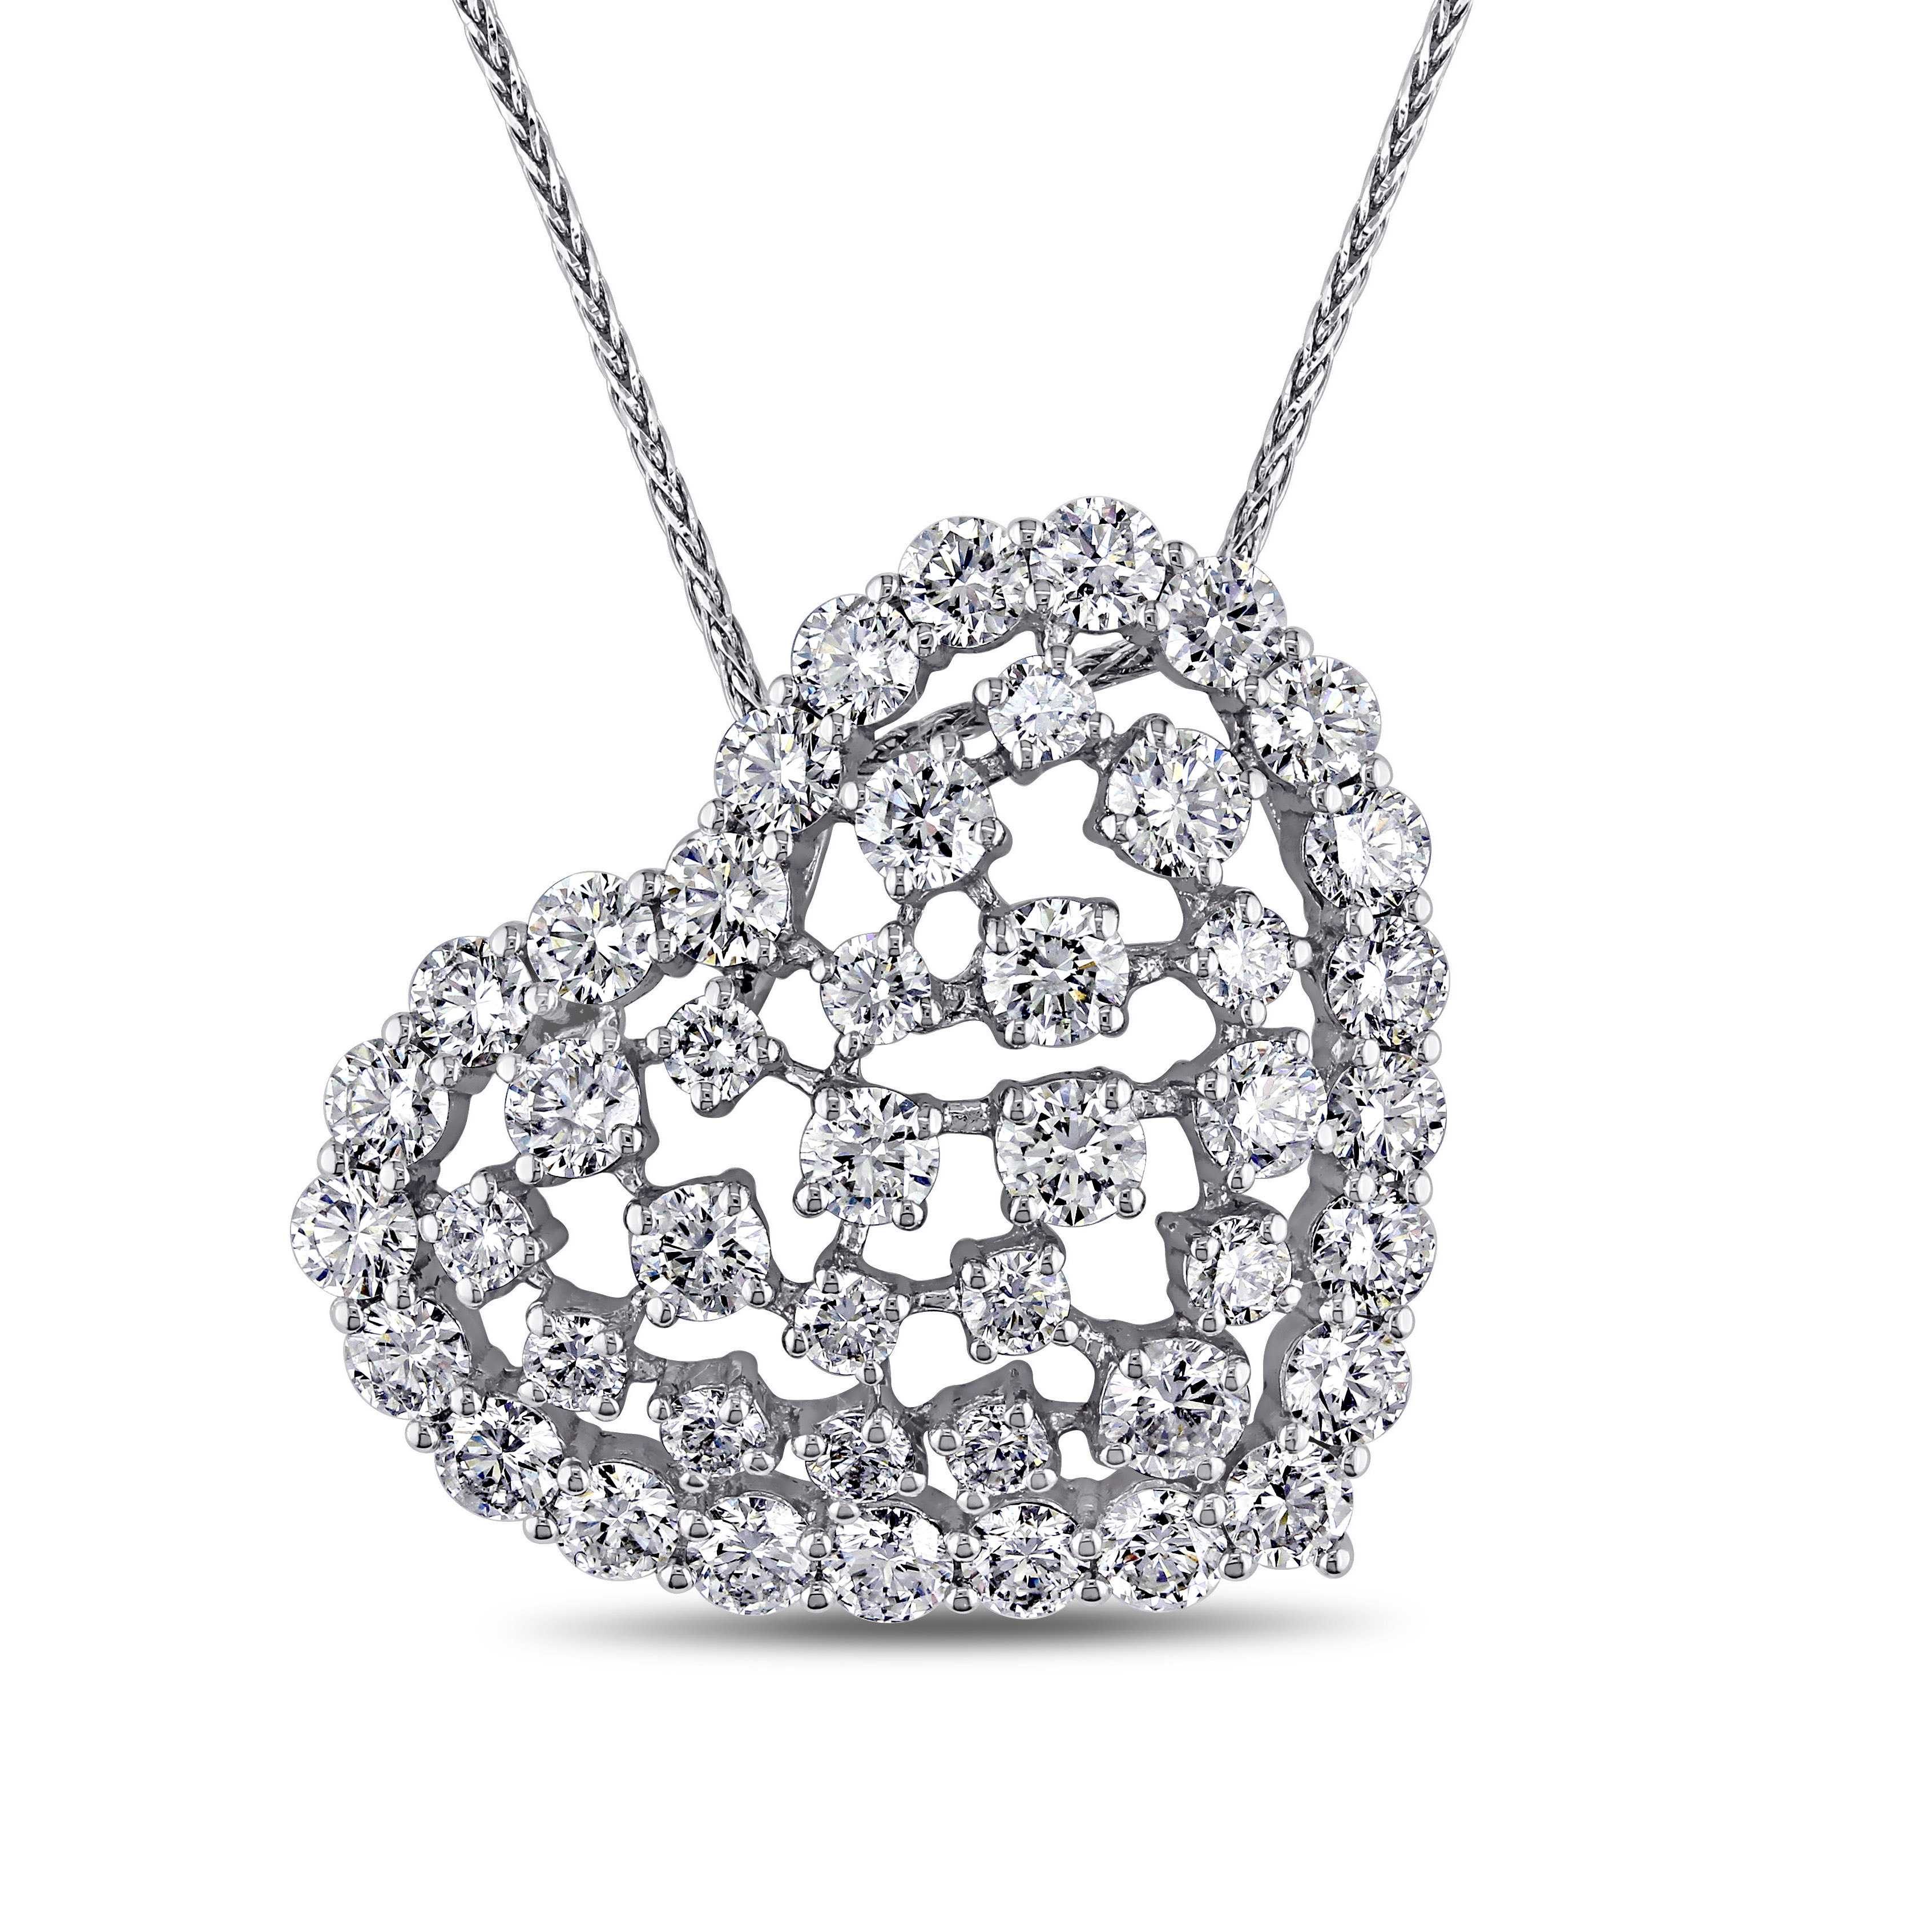 3 CT TW Diamond Heart Pendant with Chain in 14k White Gold